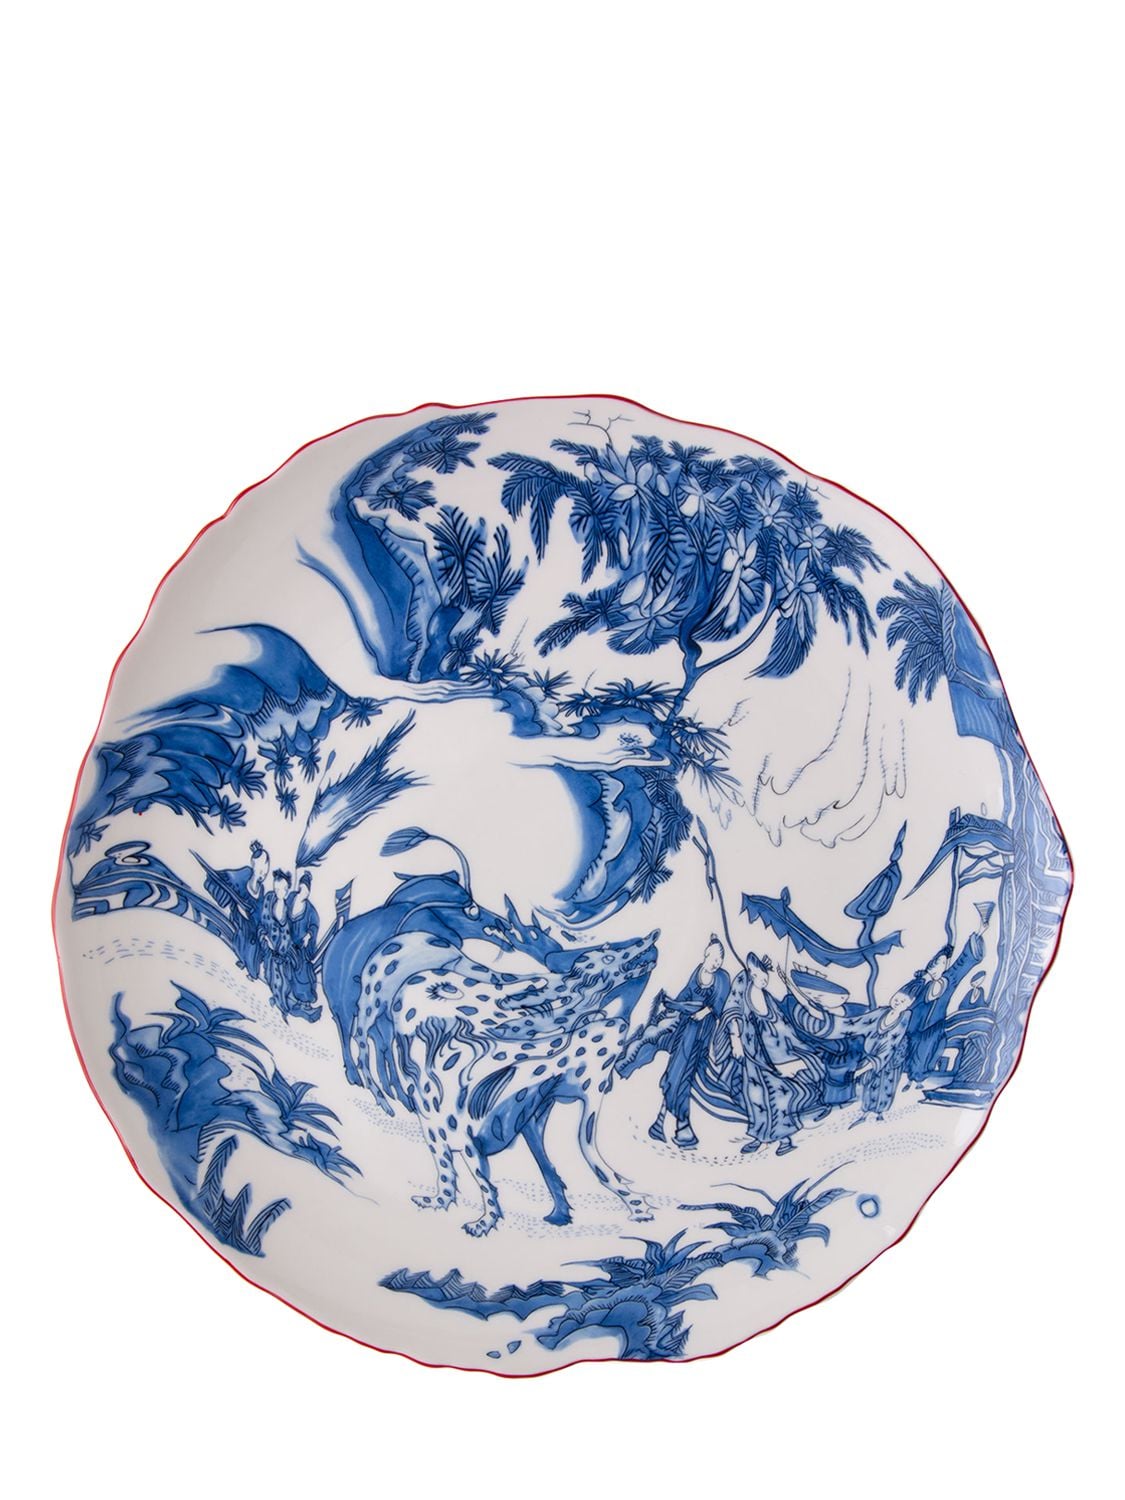 Seletti Classic On Acid Blue Chinoiserie盘子 In Blue